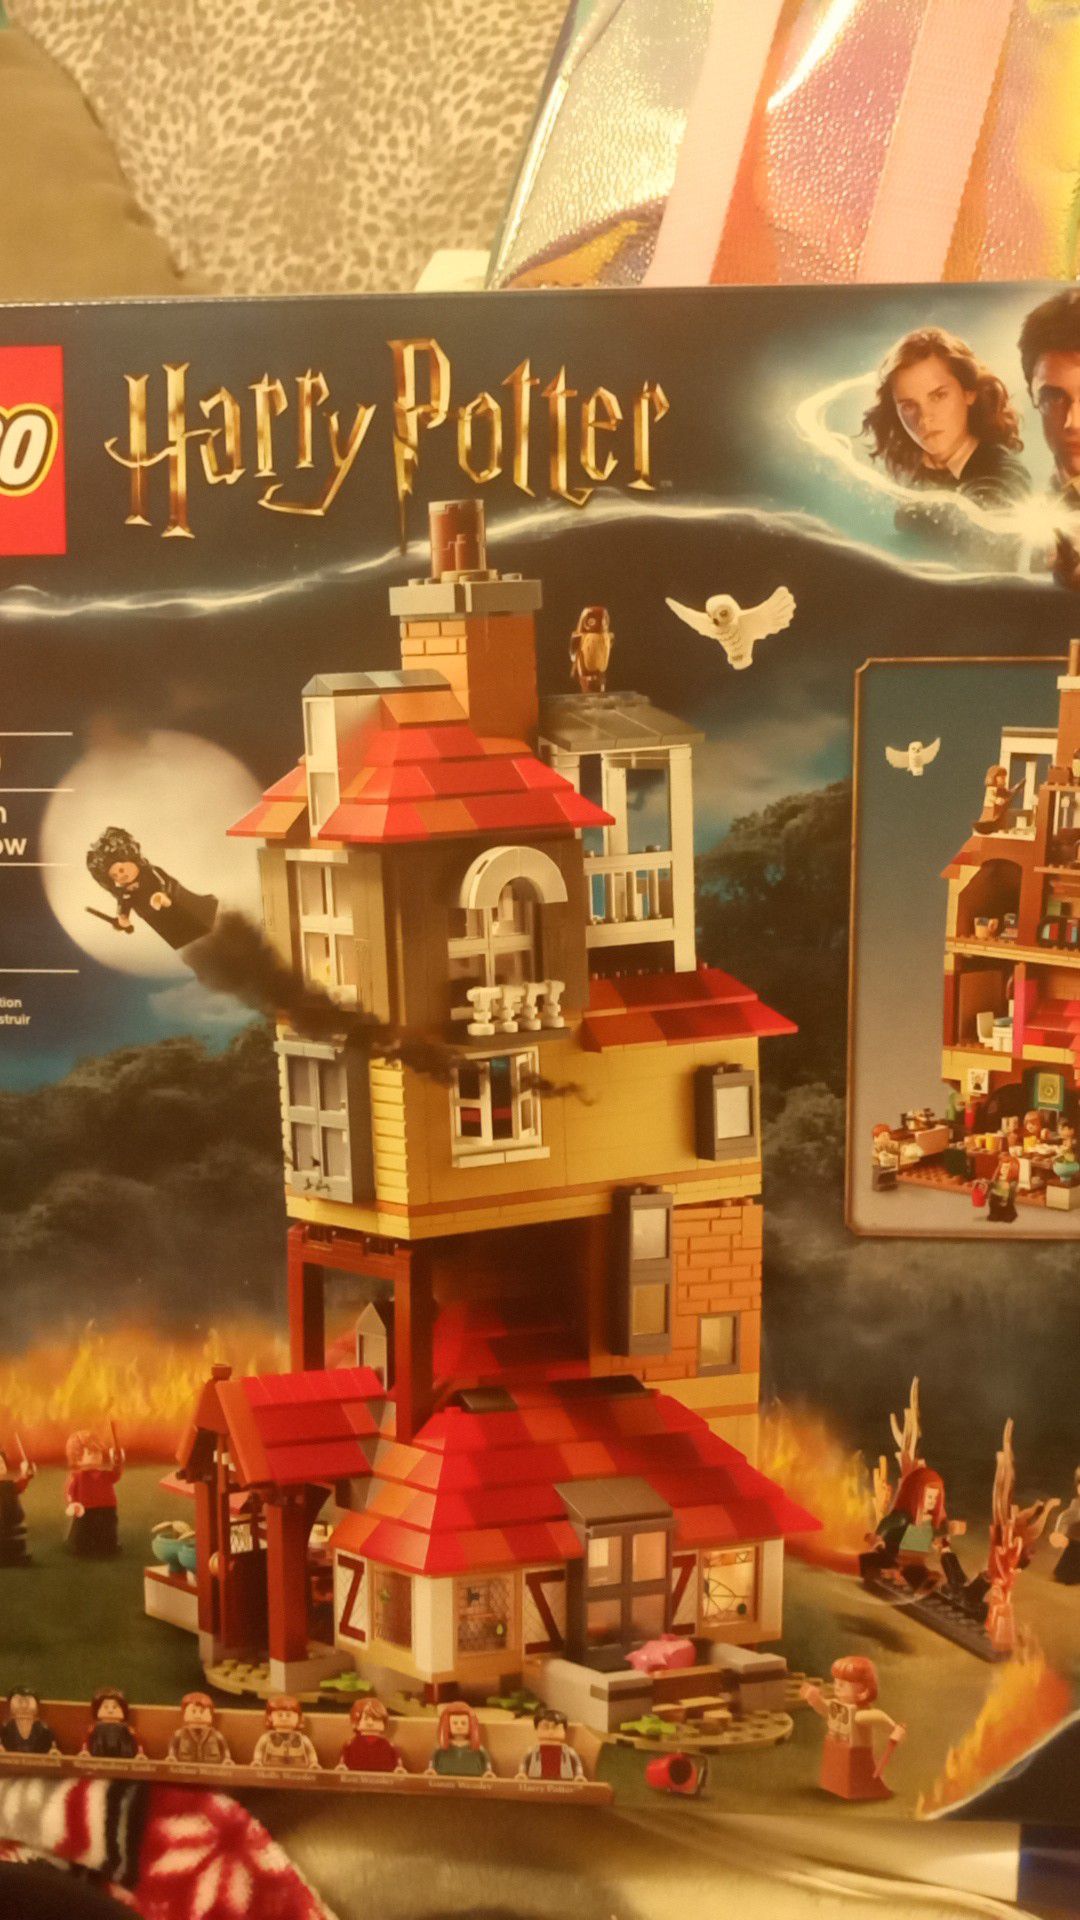 Brand New Harry Potter "attack on the burrow"